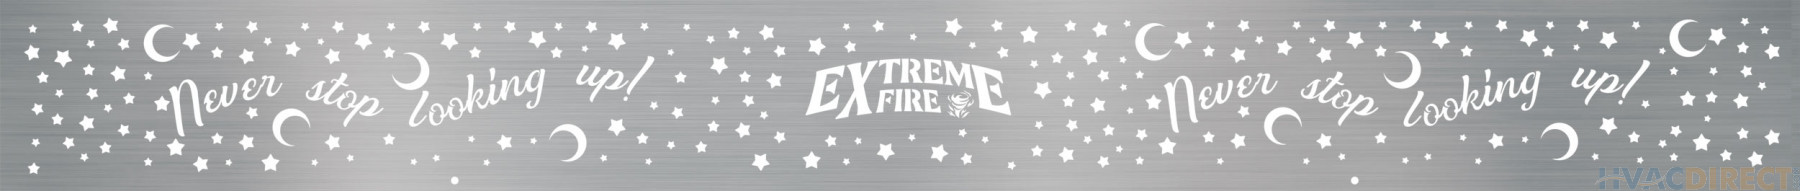 Extreme Fire “Starry Night” Steel Fire Ring - 50008